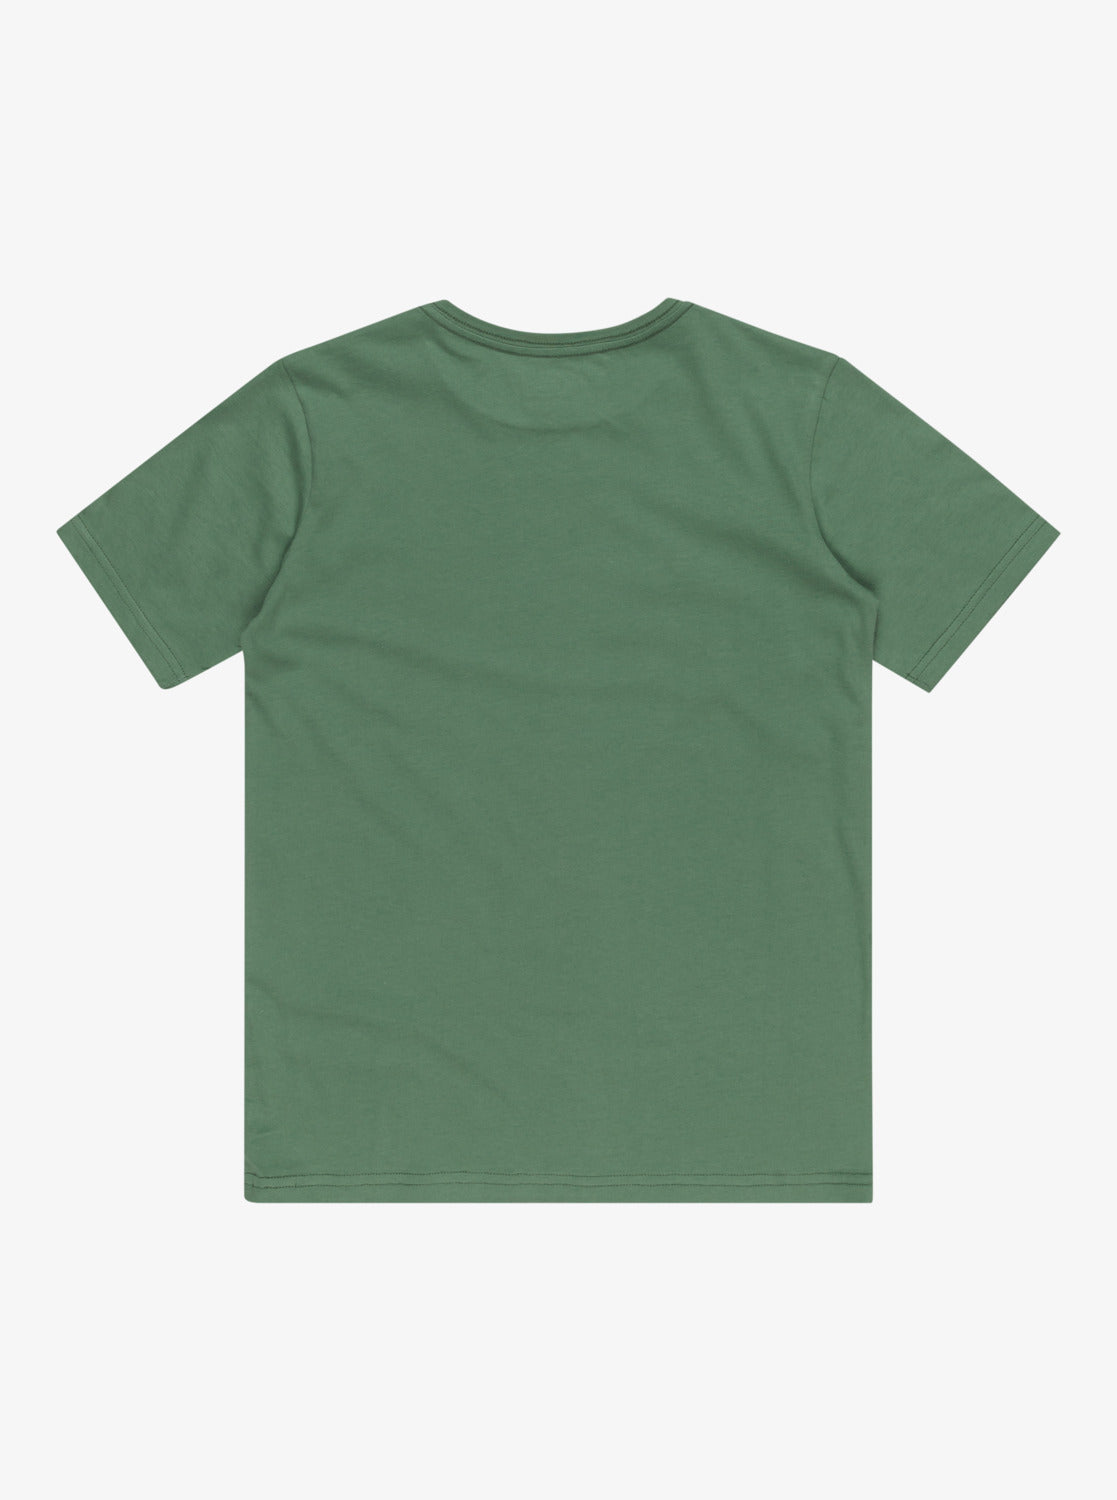 Quiksilver Circle Up Boys T-Shirt in Frosty Spruce